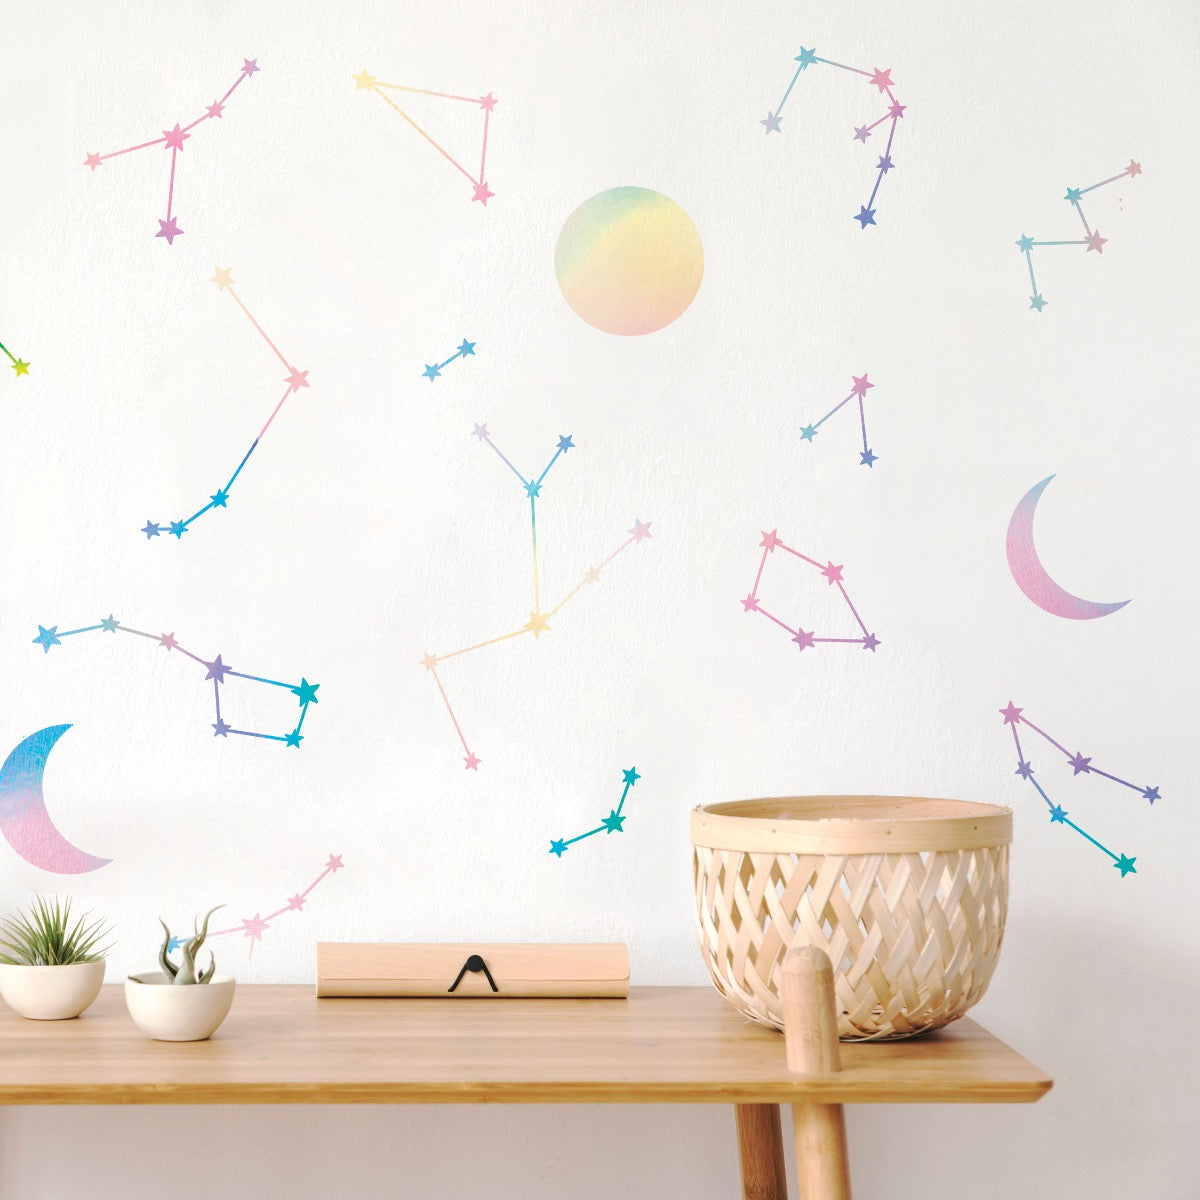 A side table in front of a wall decorated with holographic Constellations & Moons wall decals from Tempaper.